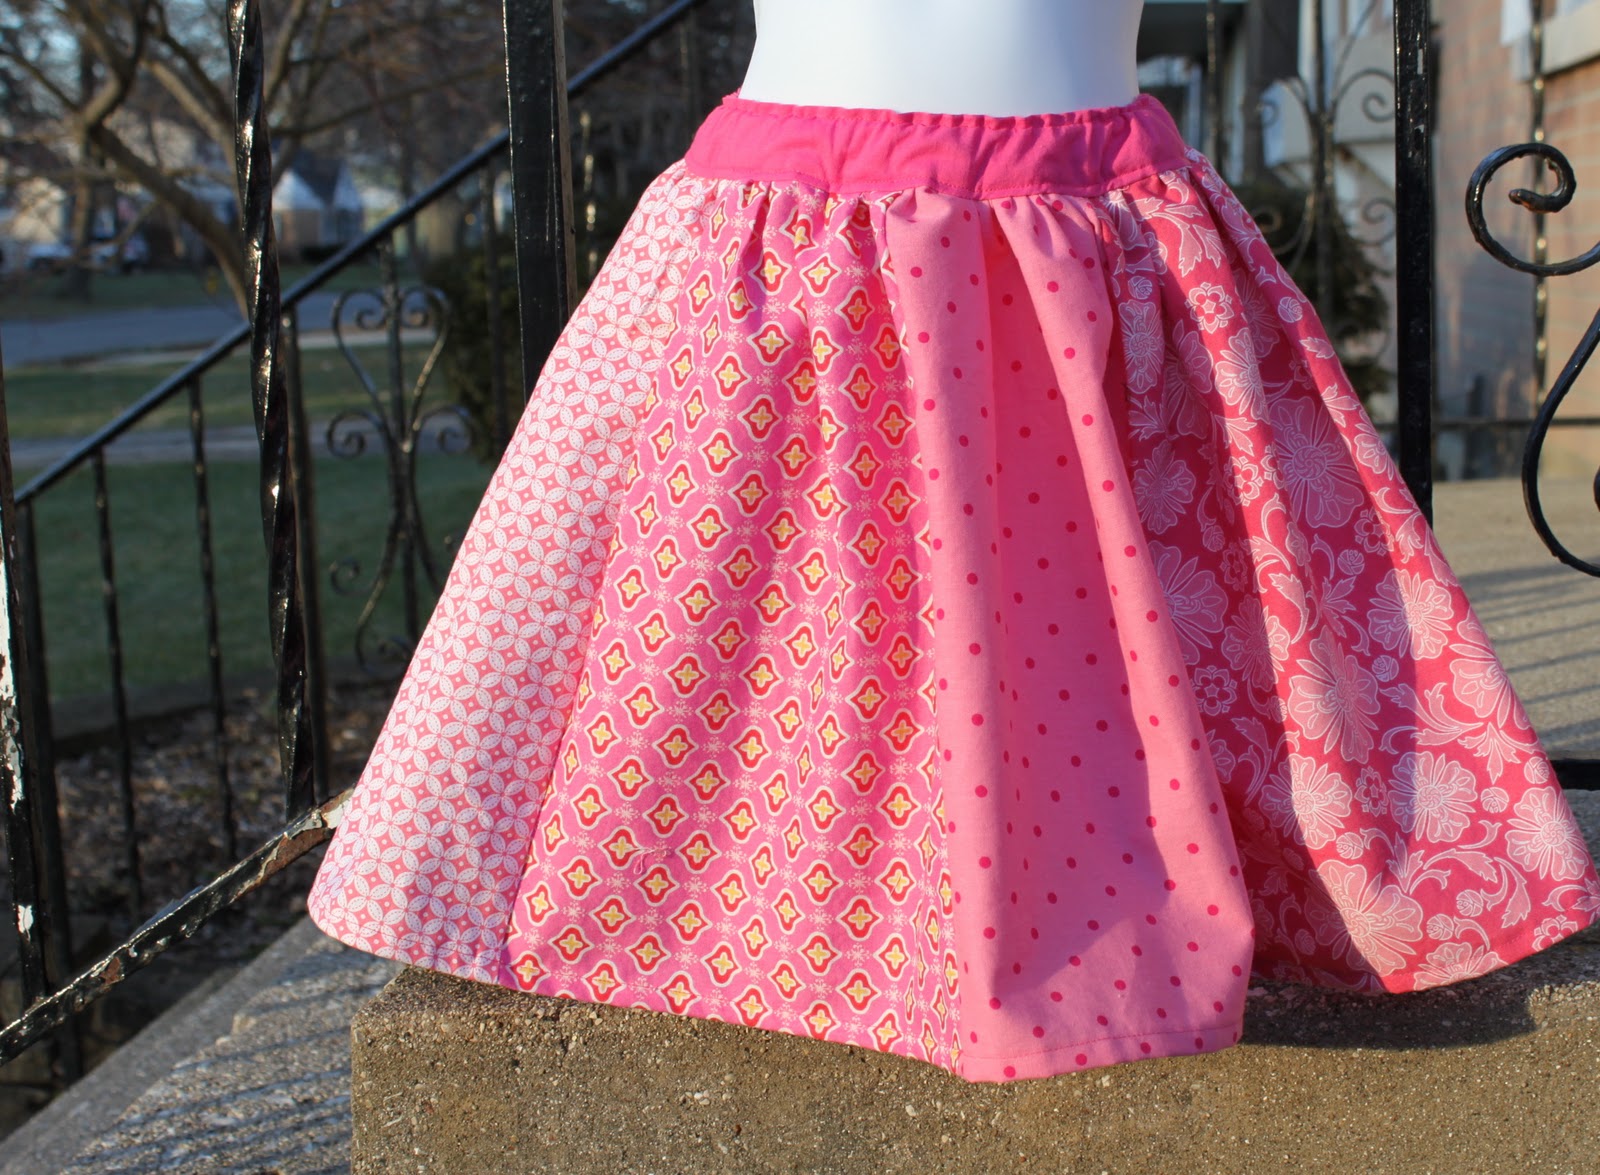 sew easy being green: Twirl Skirt Tutorial and a Cheat (shhhh!)